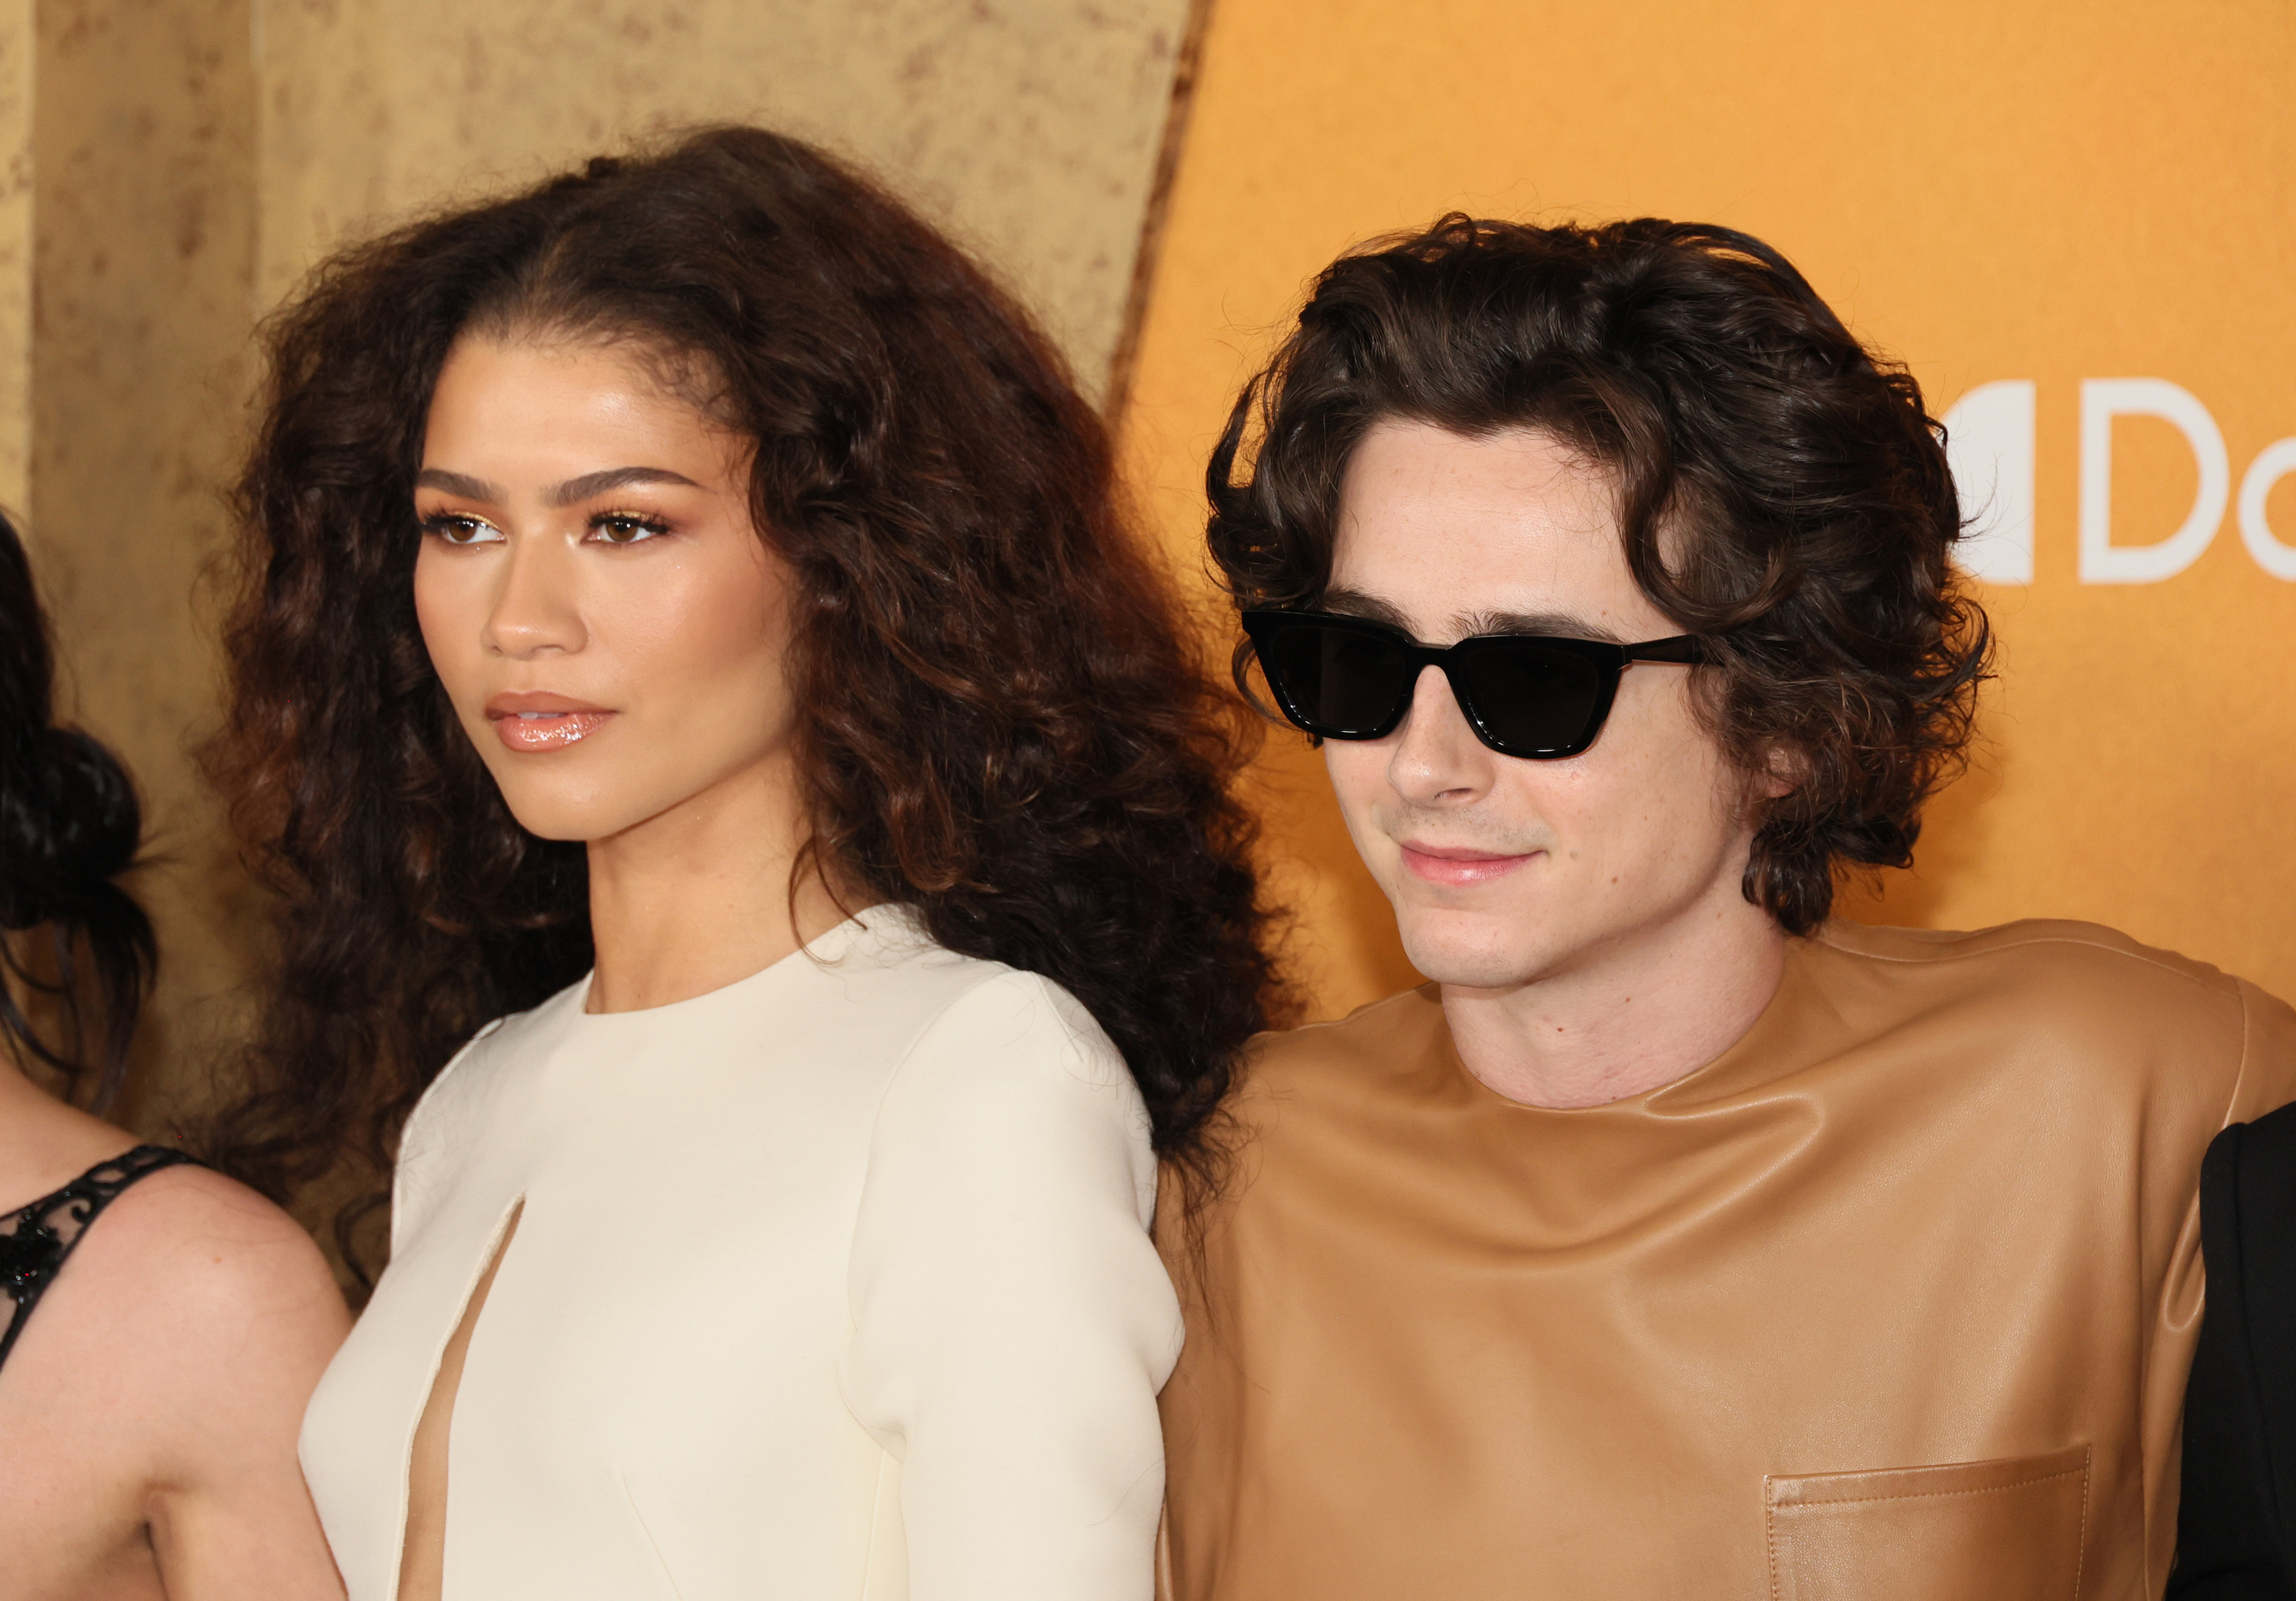 Zendaya in a chic dress and Timothée Chalamet in a stylish outfit pose together at an event